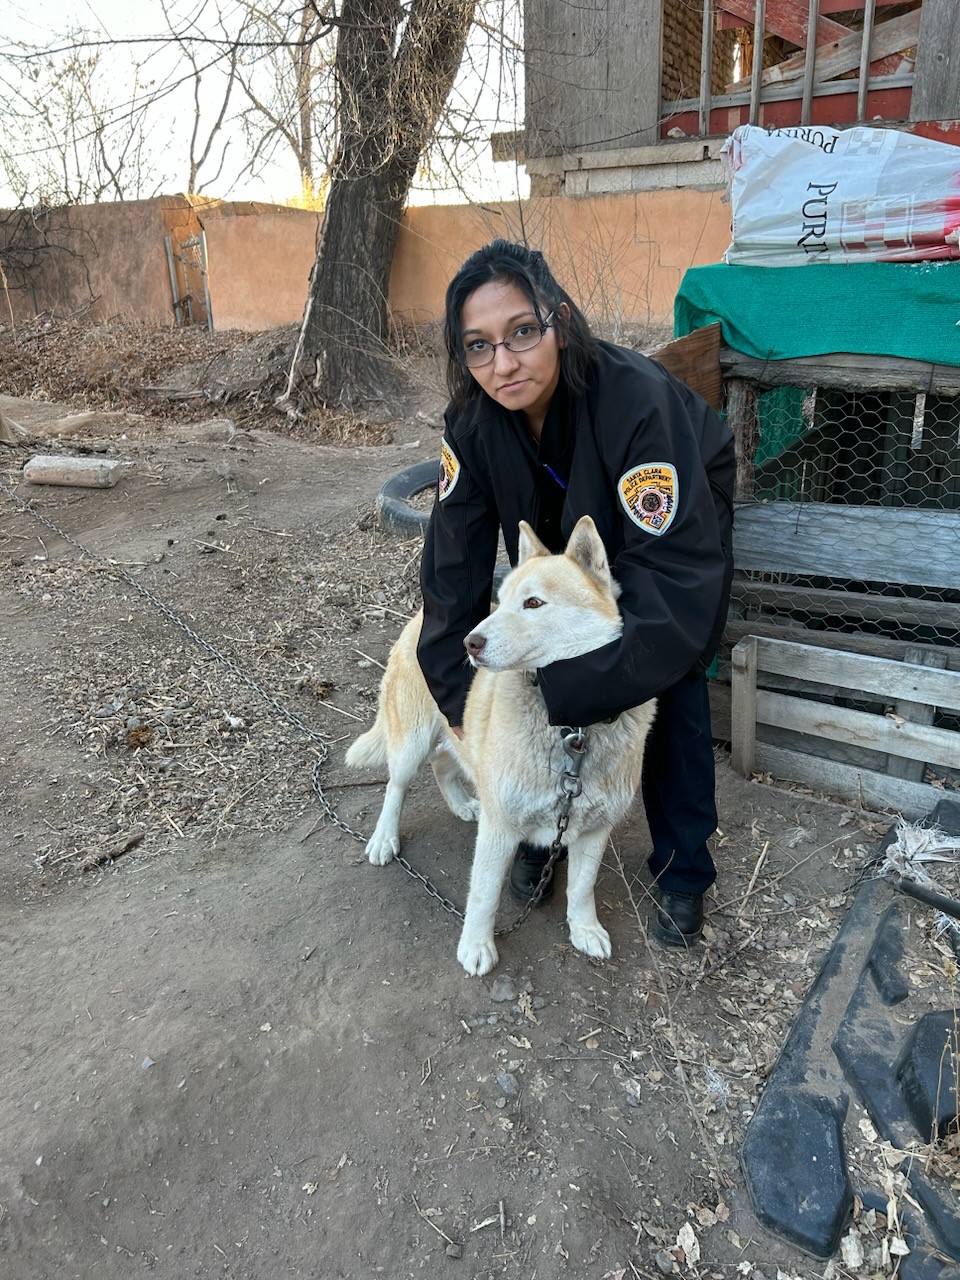 Animal Control Officer holding a dog